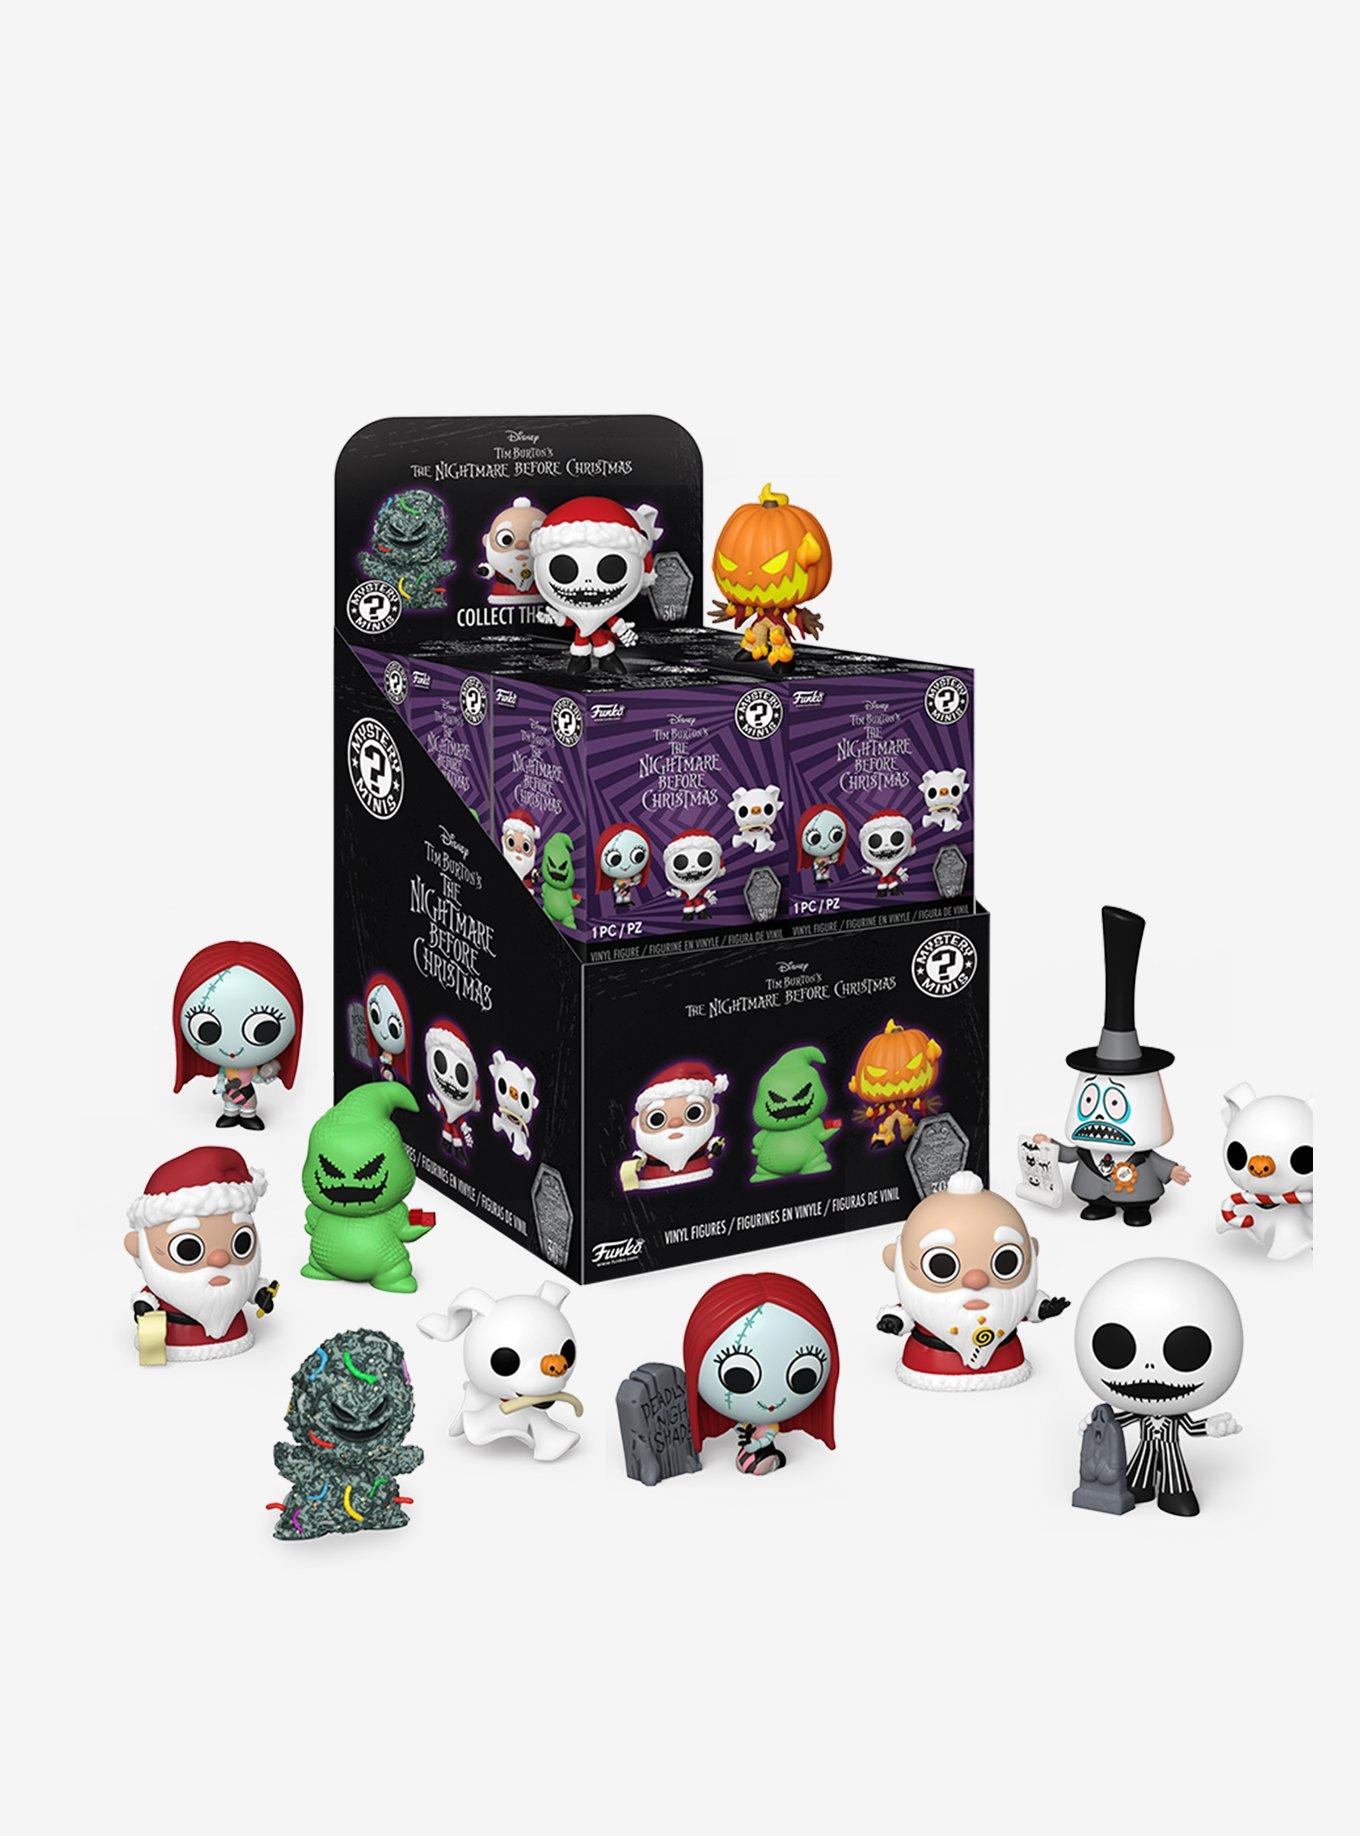 Disney and Pixar Turning Red Collectible Figures, Series 1 Blind Bag Movie  Collectibles, Officially Licensed Kids Toys for Ages 3 Up, Gifts and  Presents 